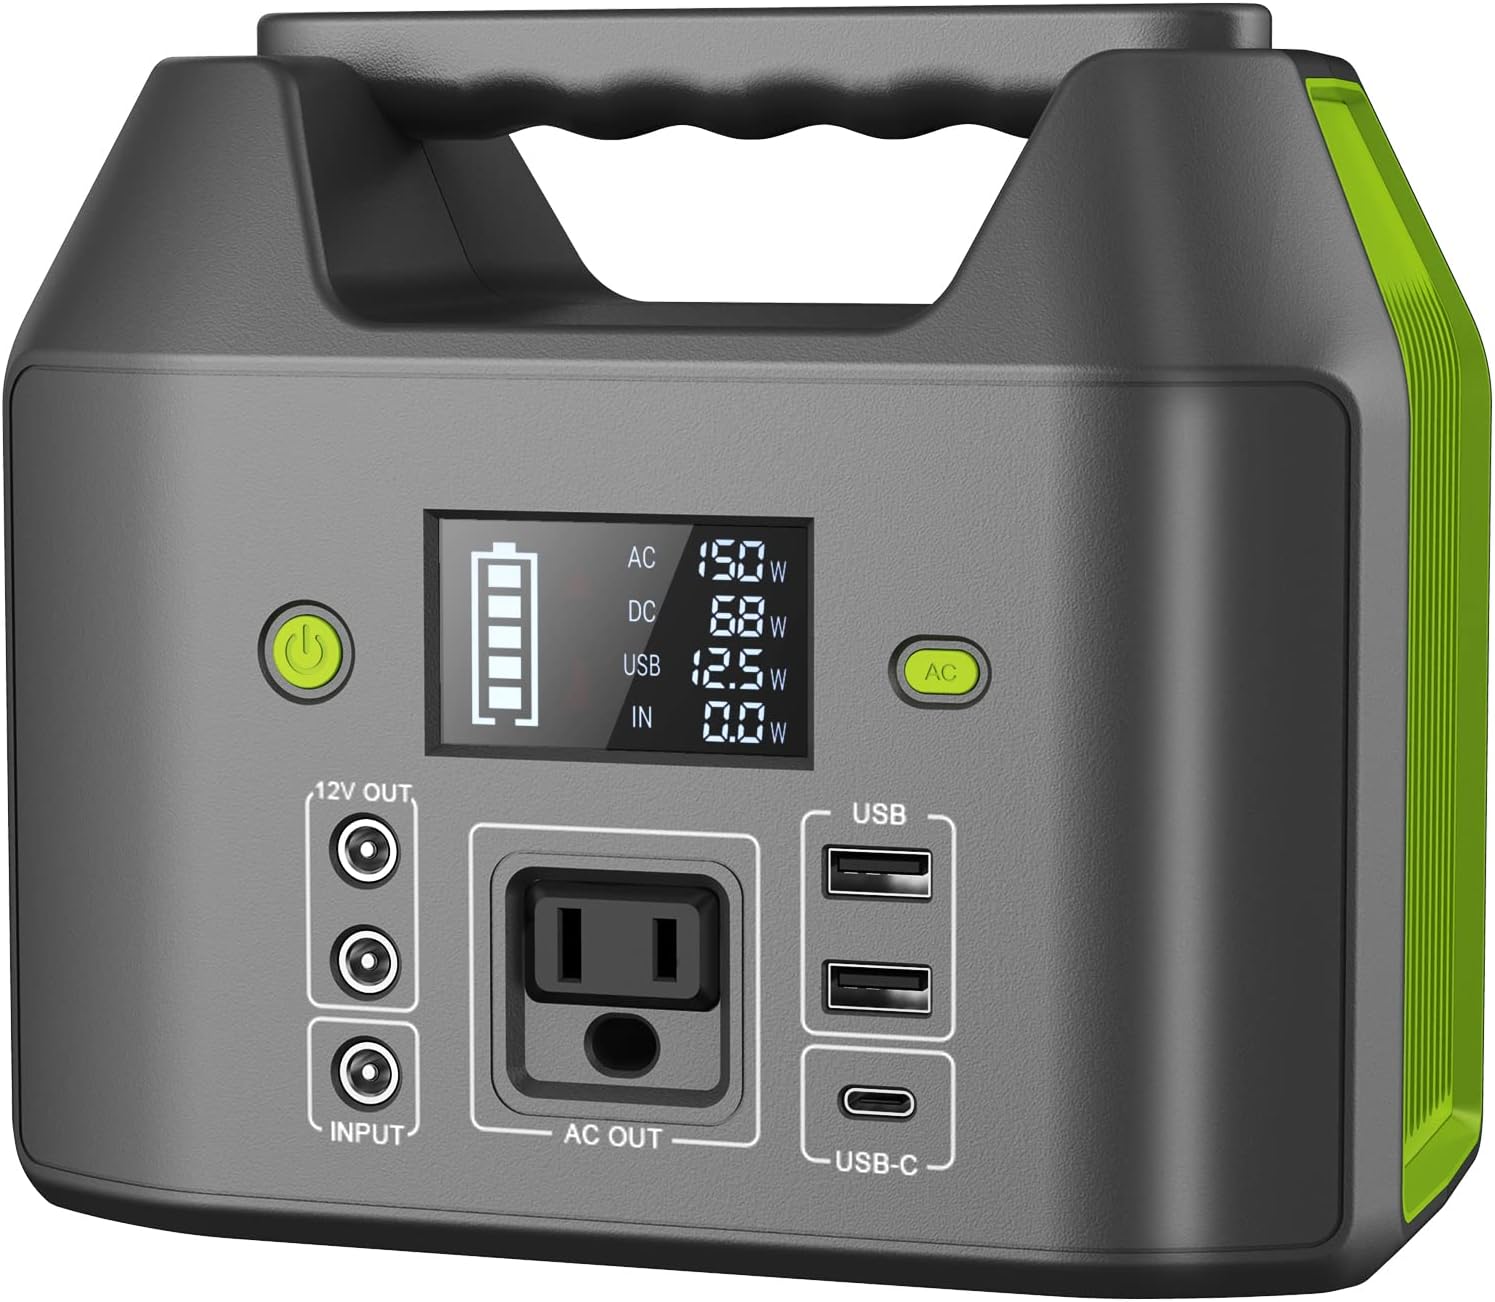 EnginStar Portable Power Station, 150W 155Wh Power Bank